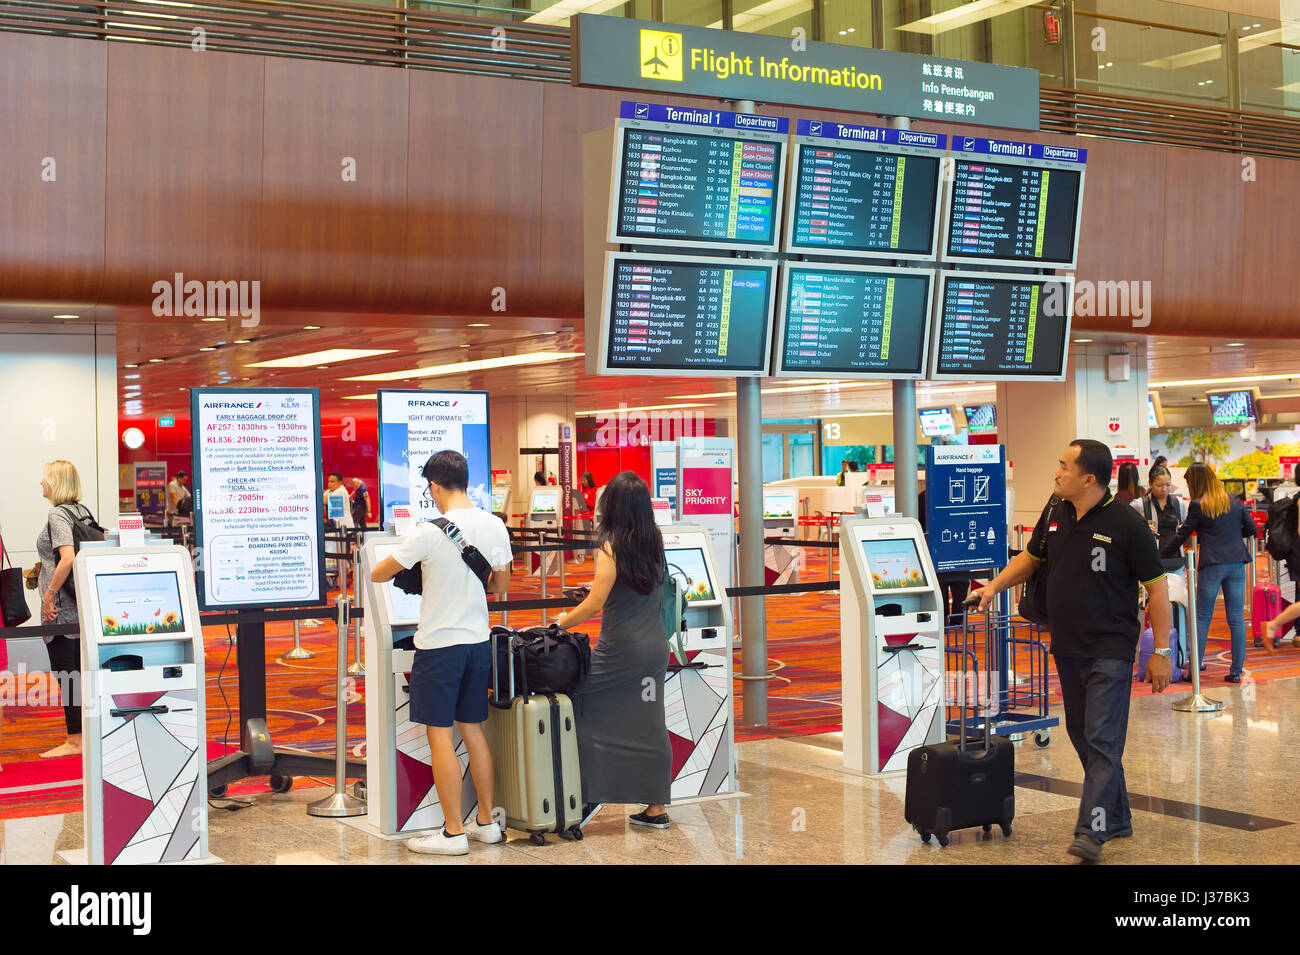 SINGAPORE - JANUARY 13, 2017: Passengers at self check-in kiosk near information board in Changi Airport. Changi Airport serves more than 100 airlines Stock Photo